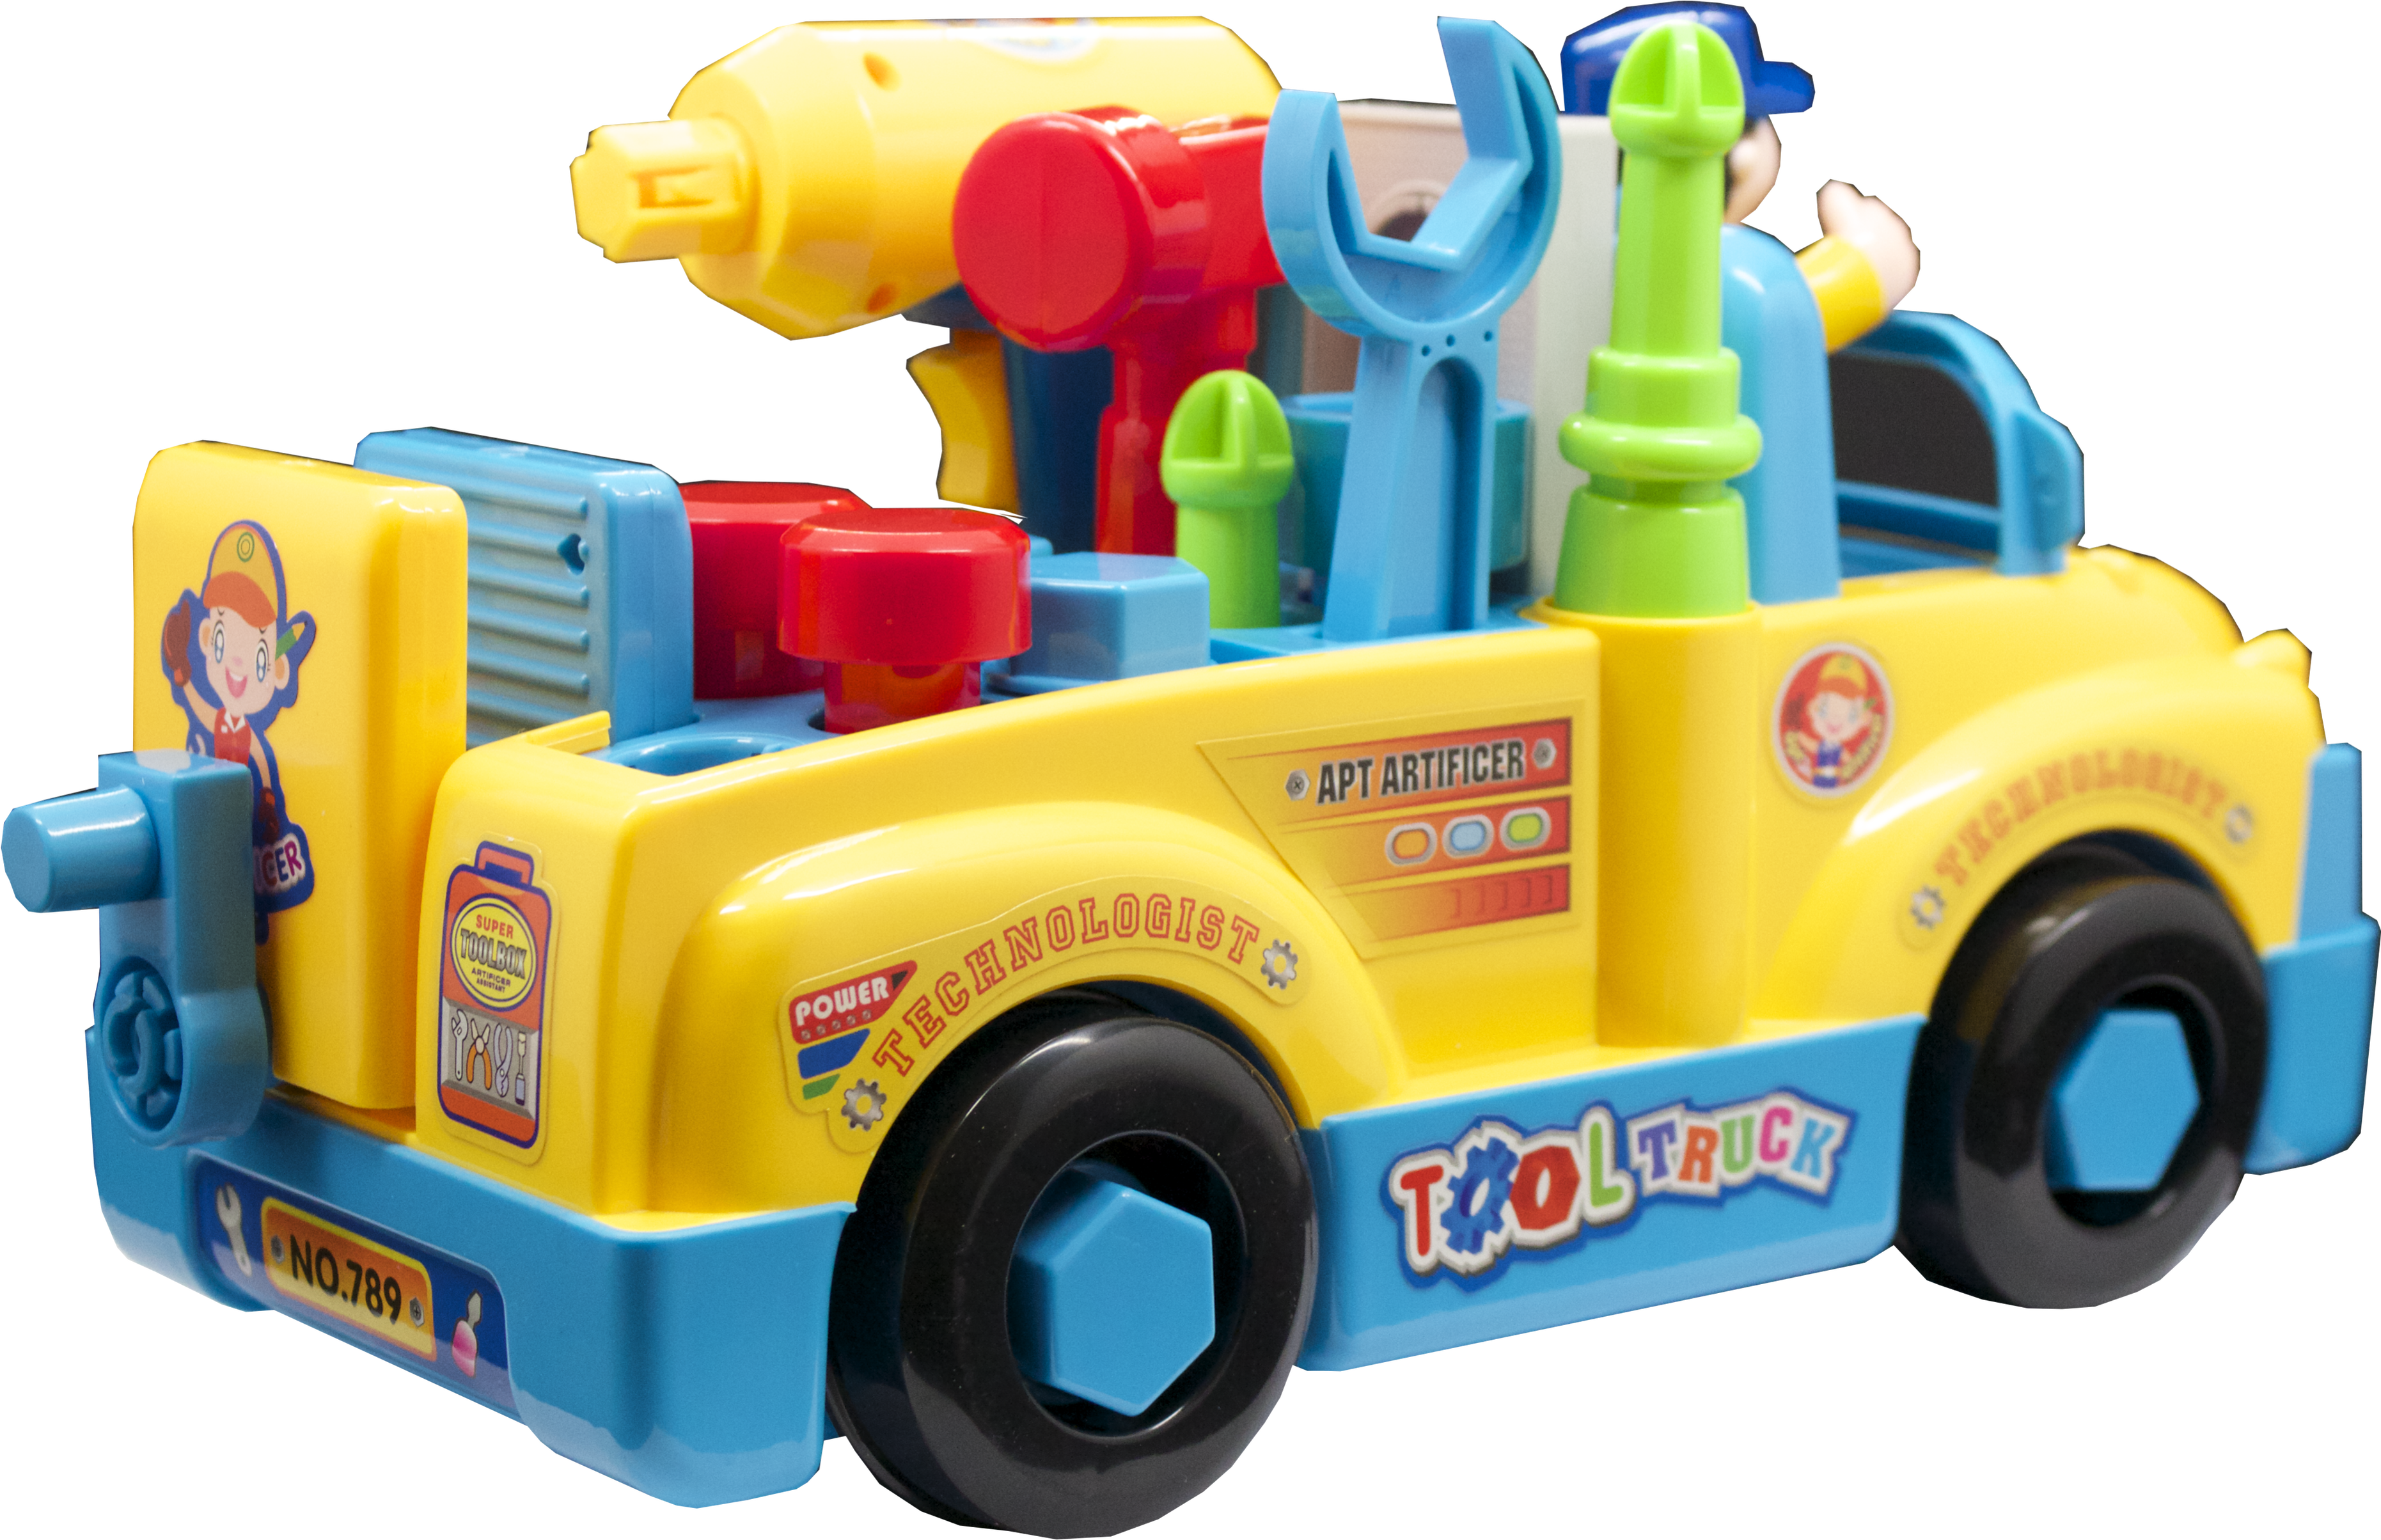 Take Apart Truck Toys With Power Tools For Preschool - Tool Truck (3926x2613)